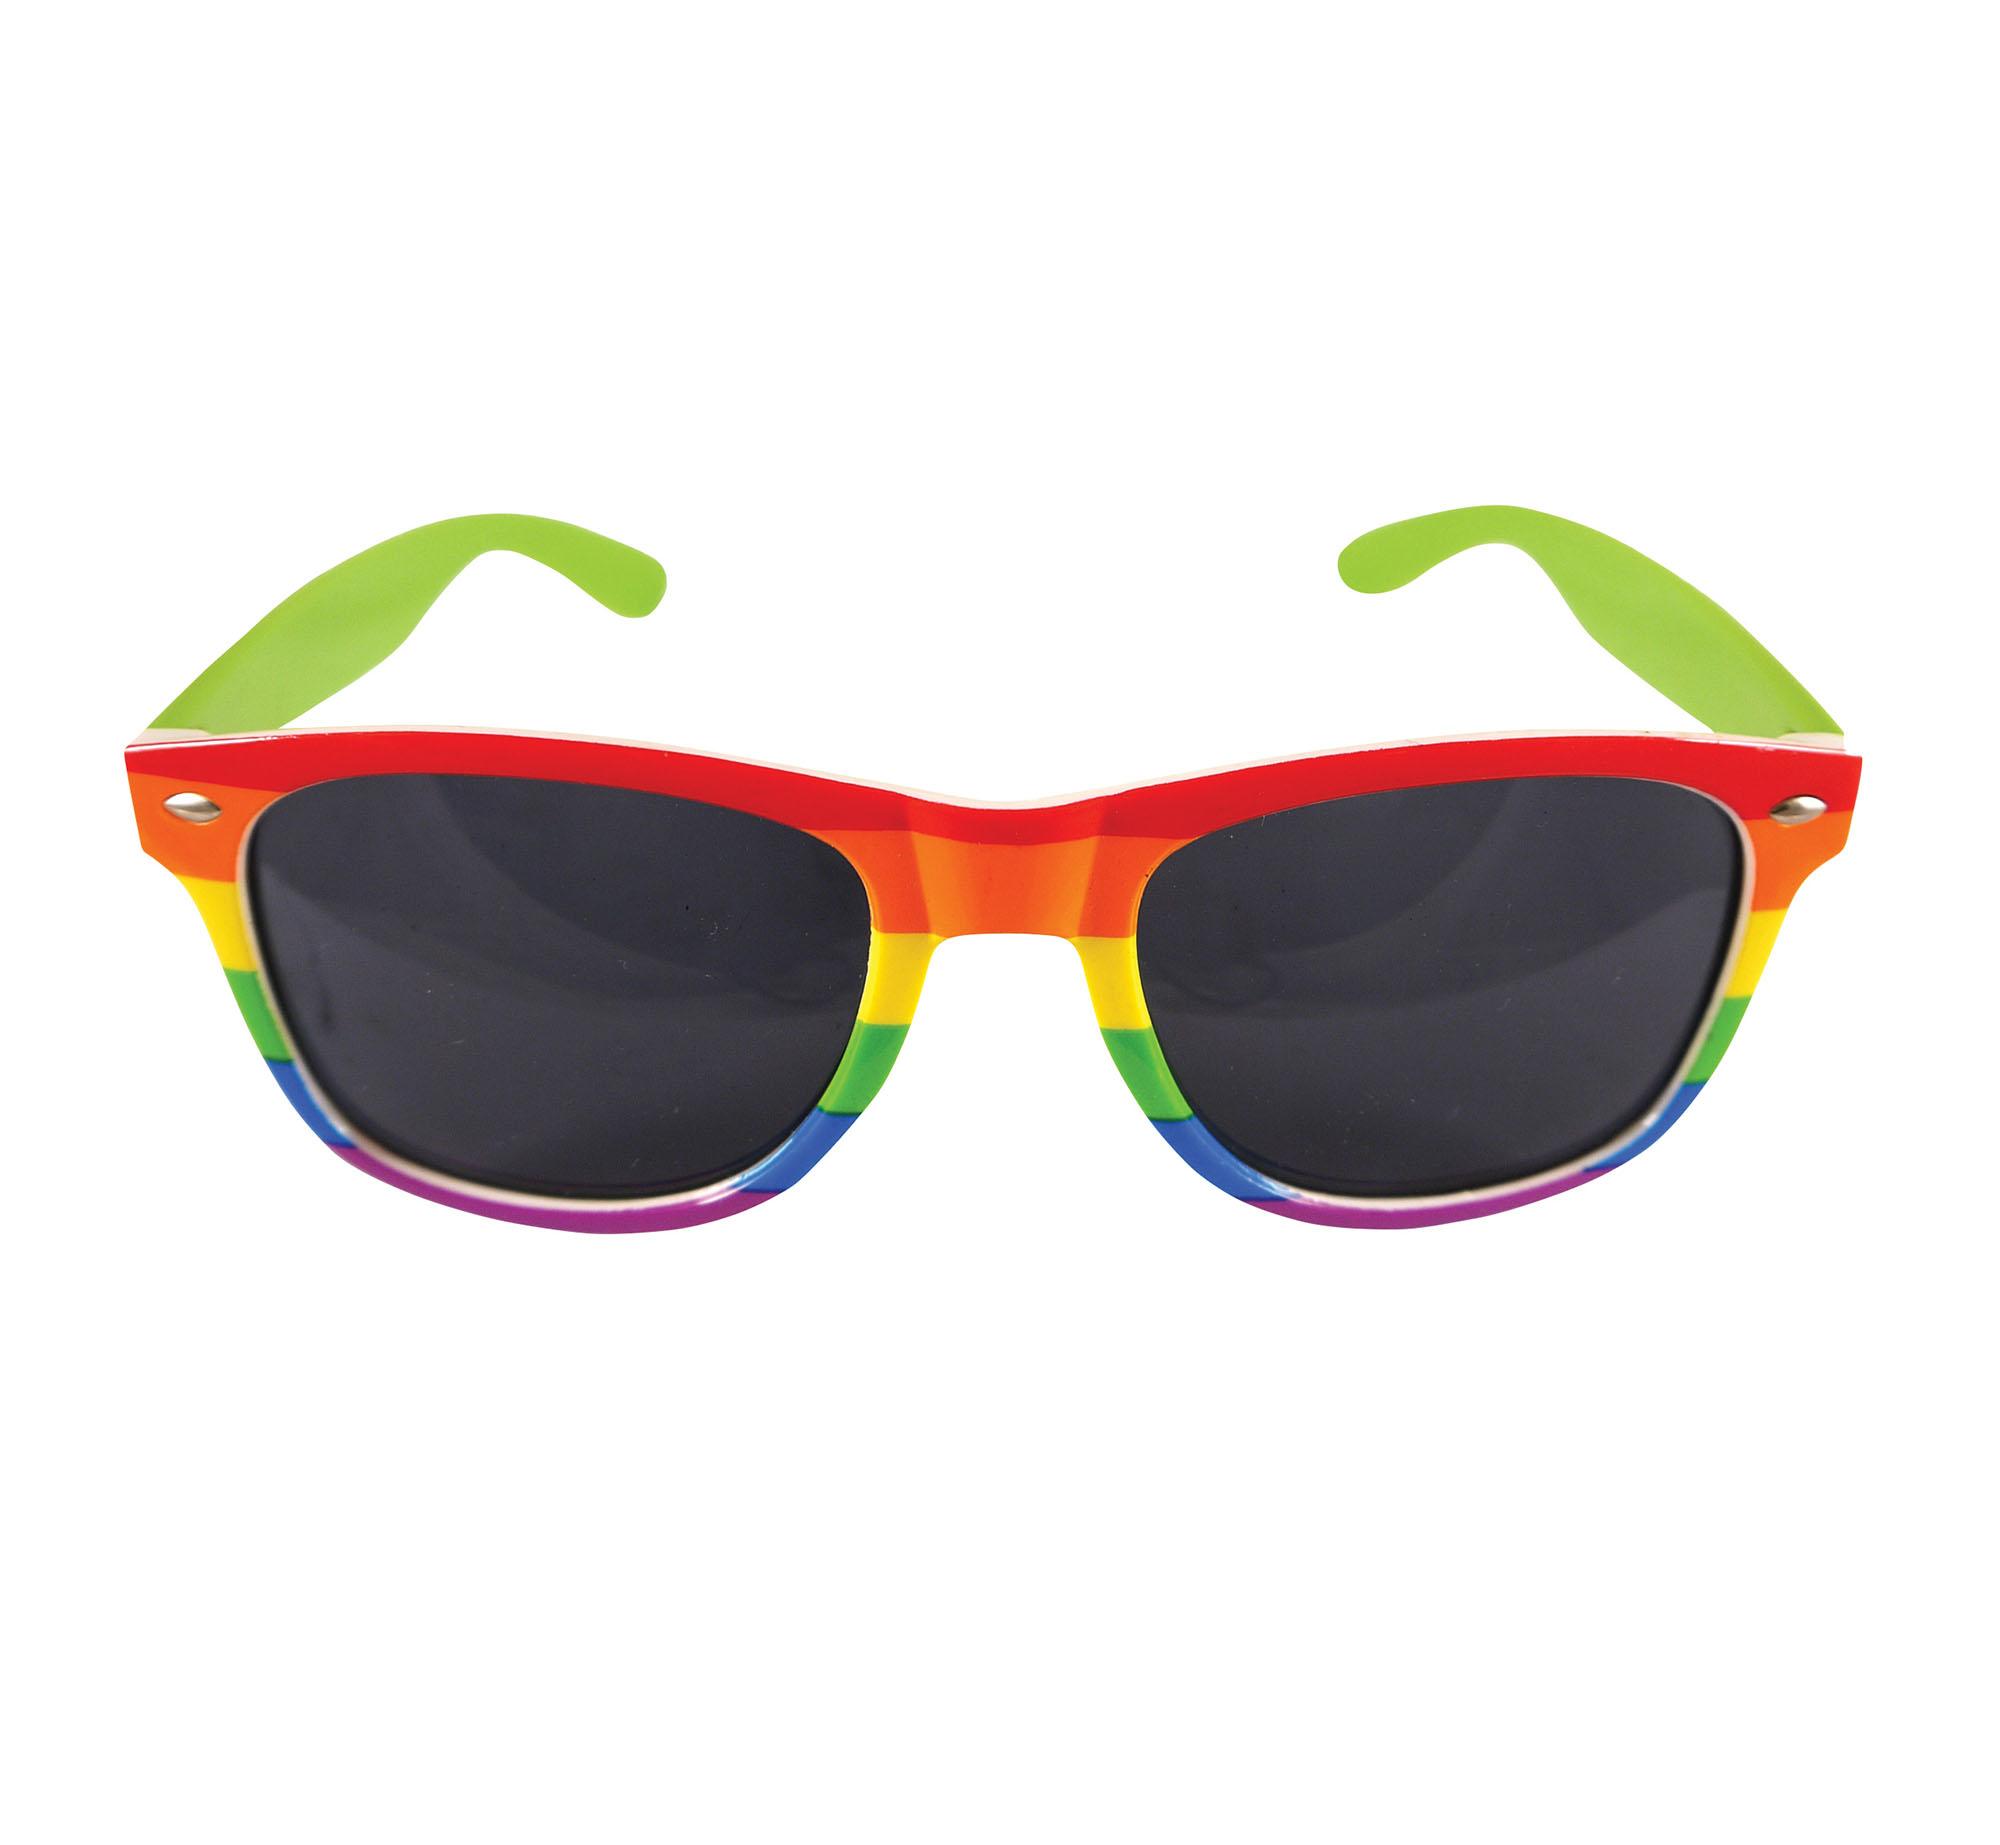 Rainbow Glasses Wayfarer Style with Dark Lenses by Forum Novelties 88489 / BA2337 available in the UK here at Karnival Costumes online party shop